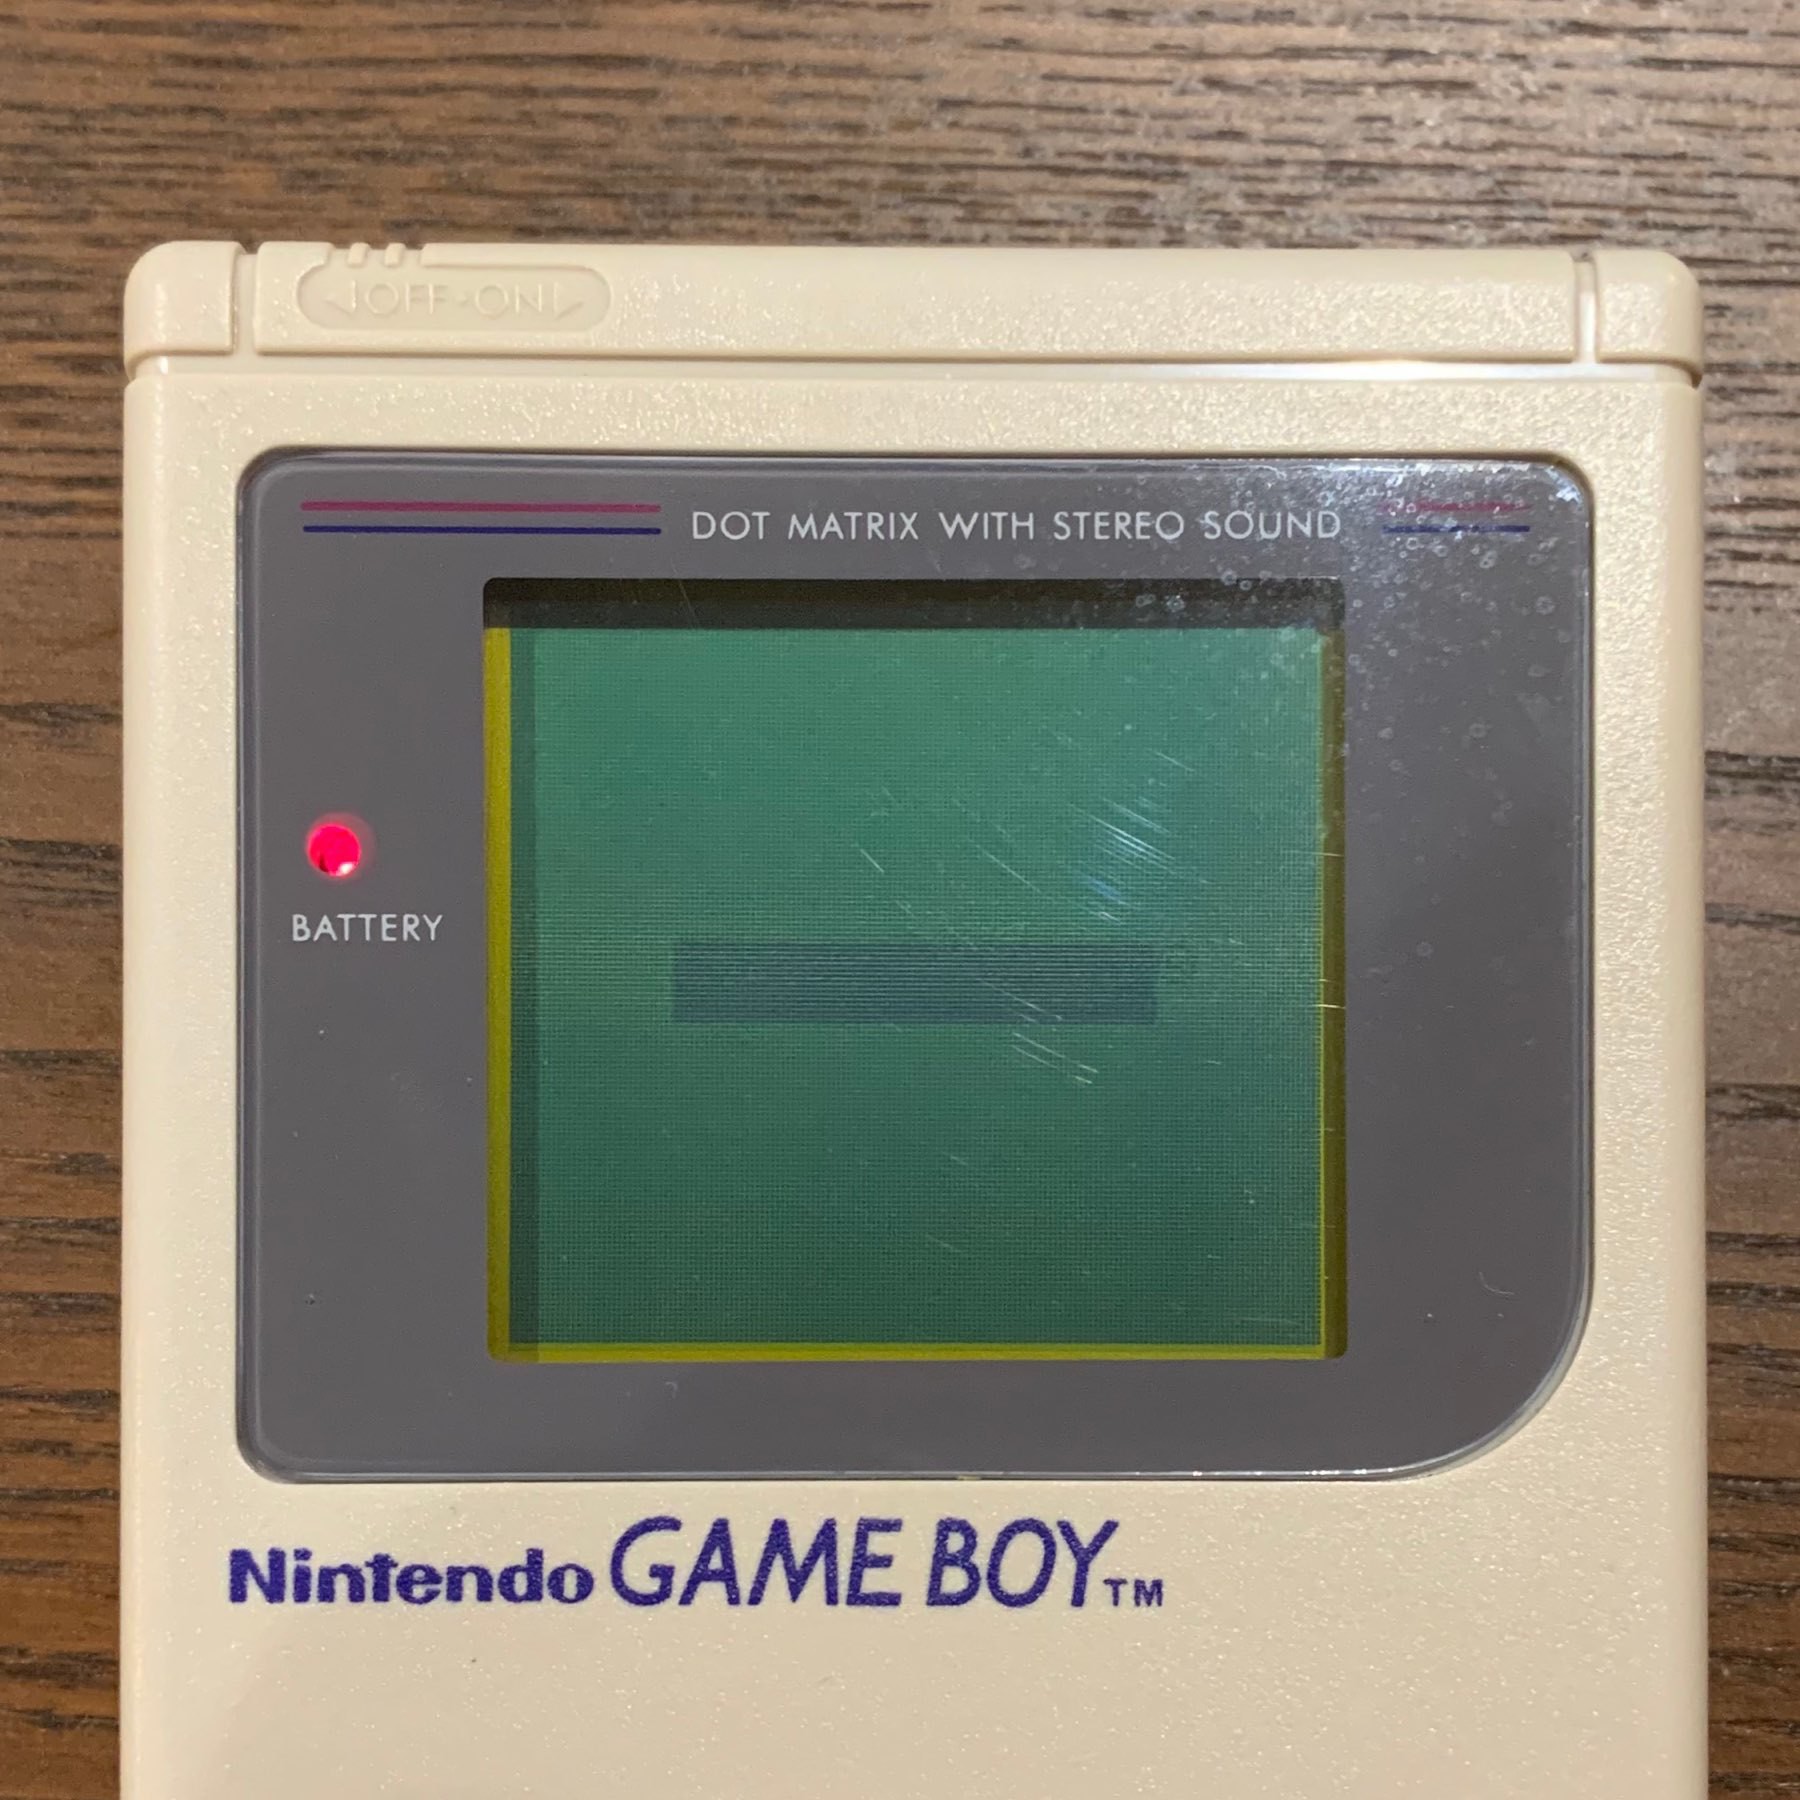 original game boy with no dead lines on screen